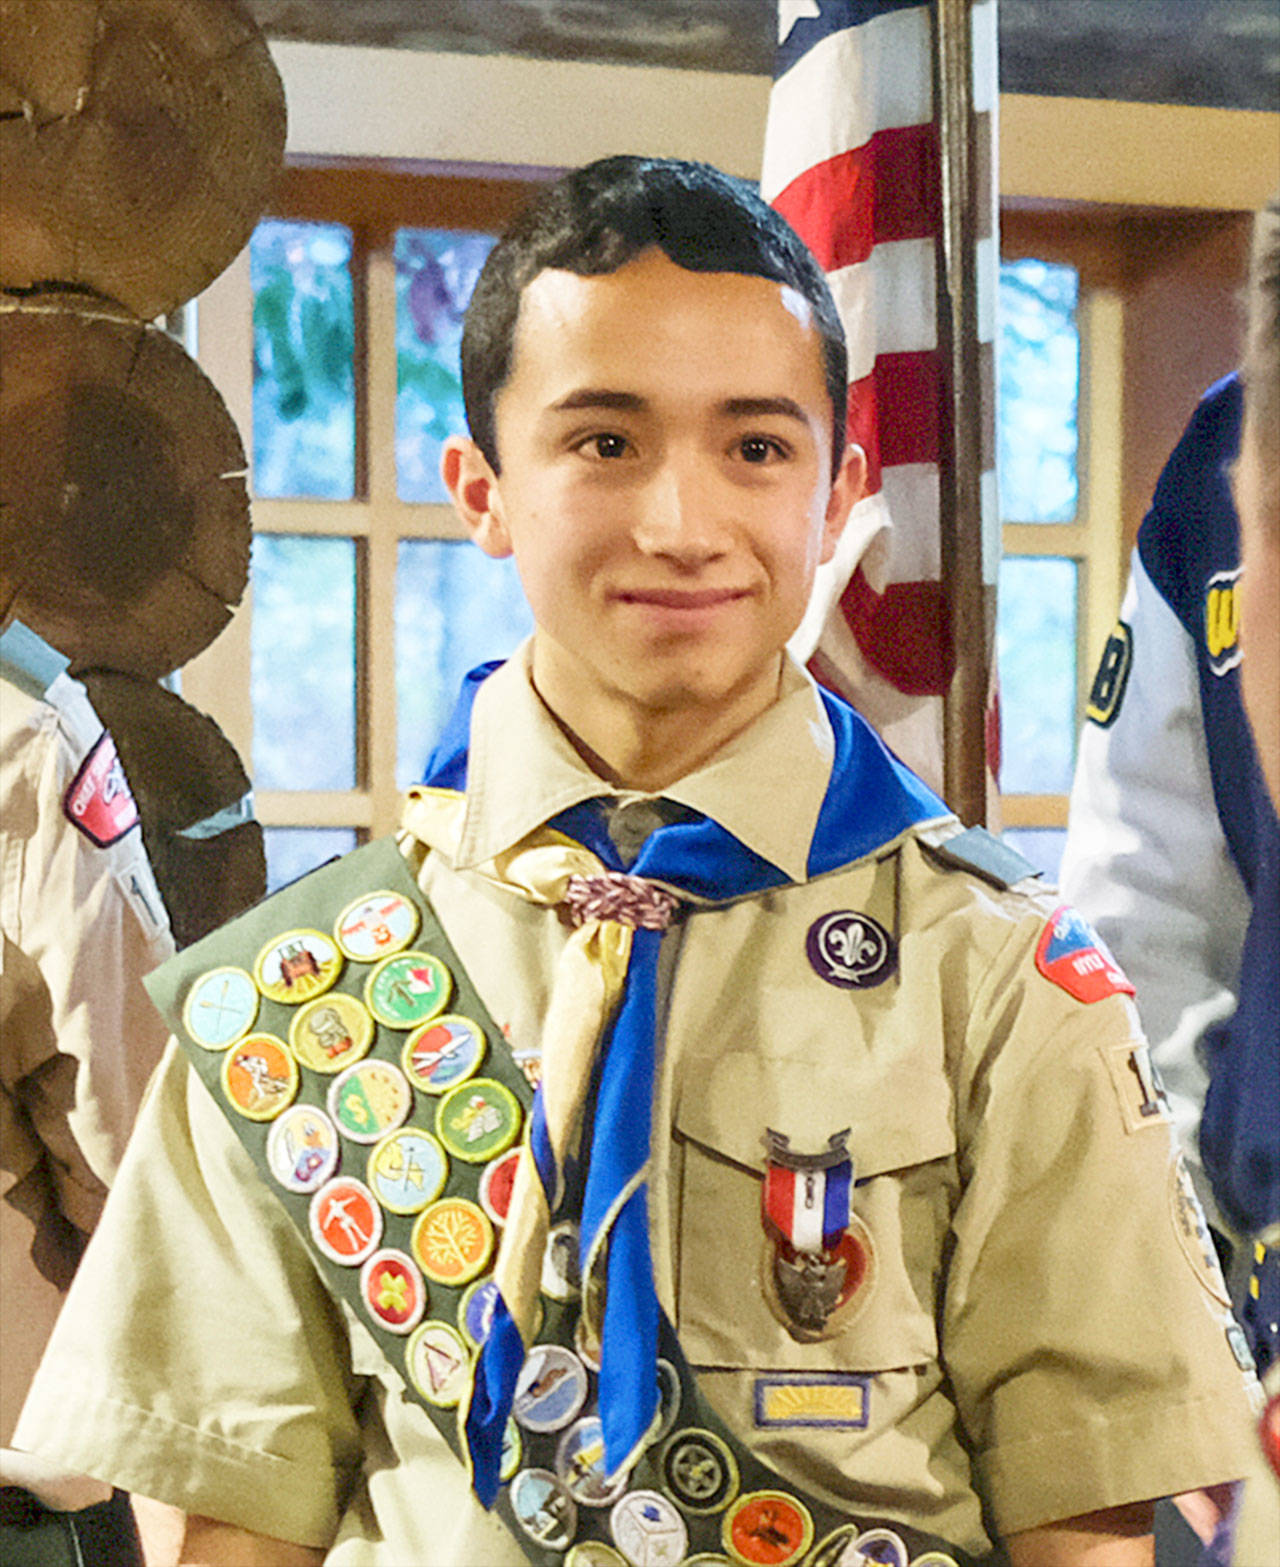 Steven Albergine wears his Eagle badge after his Court of Honor ceremony earlier this month. (Photo courtesy of Dave Albergine)